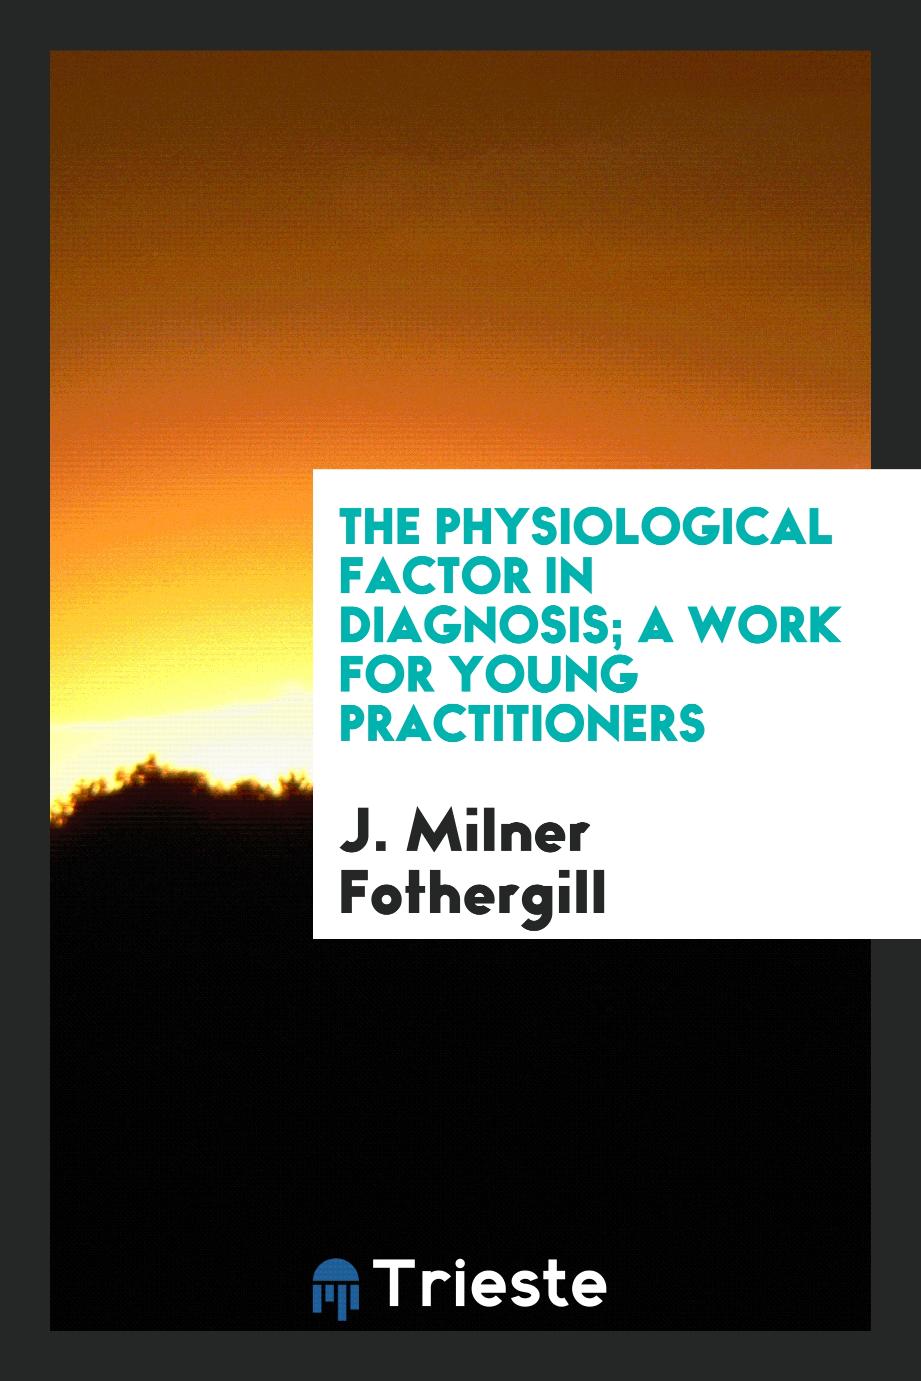 The physiological factor in diagnosis; a work for young practitioners